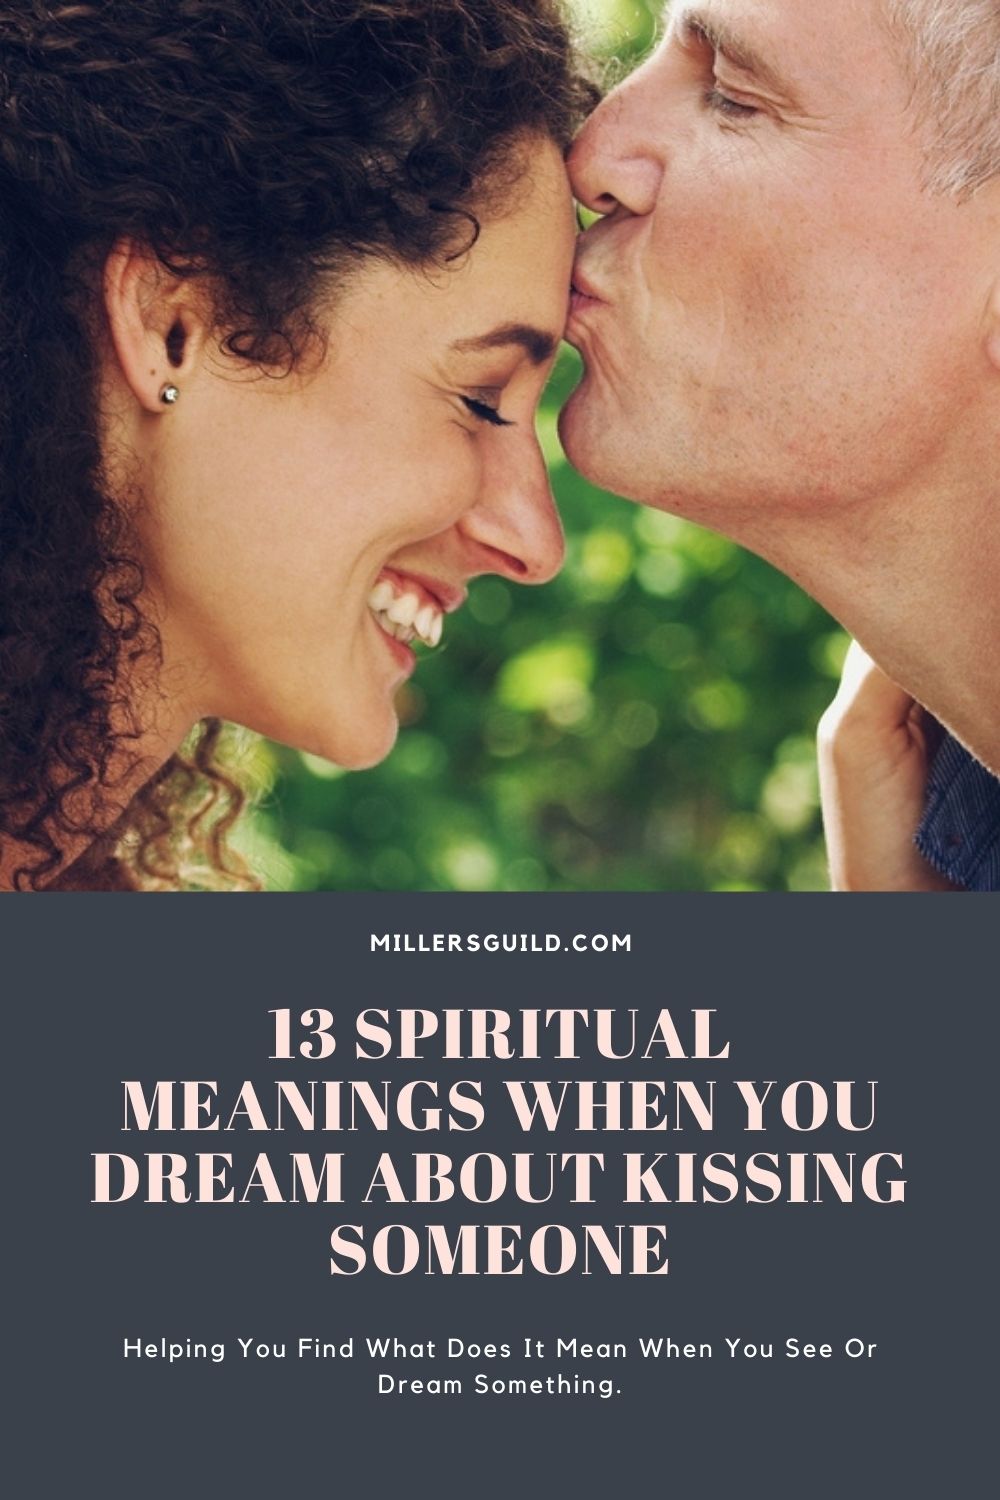 Dream About Kissing Someone